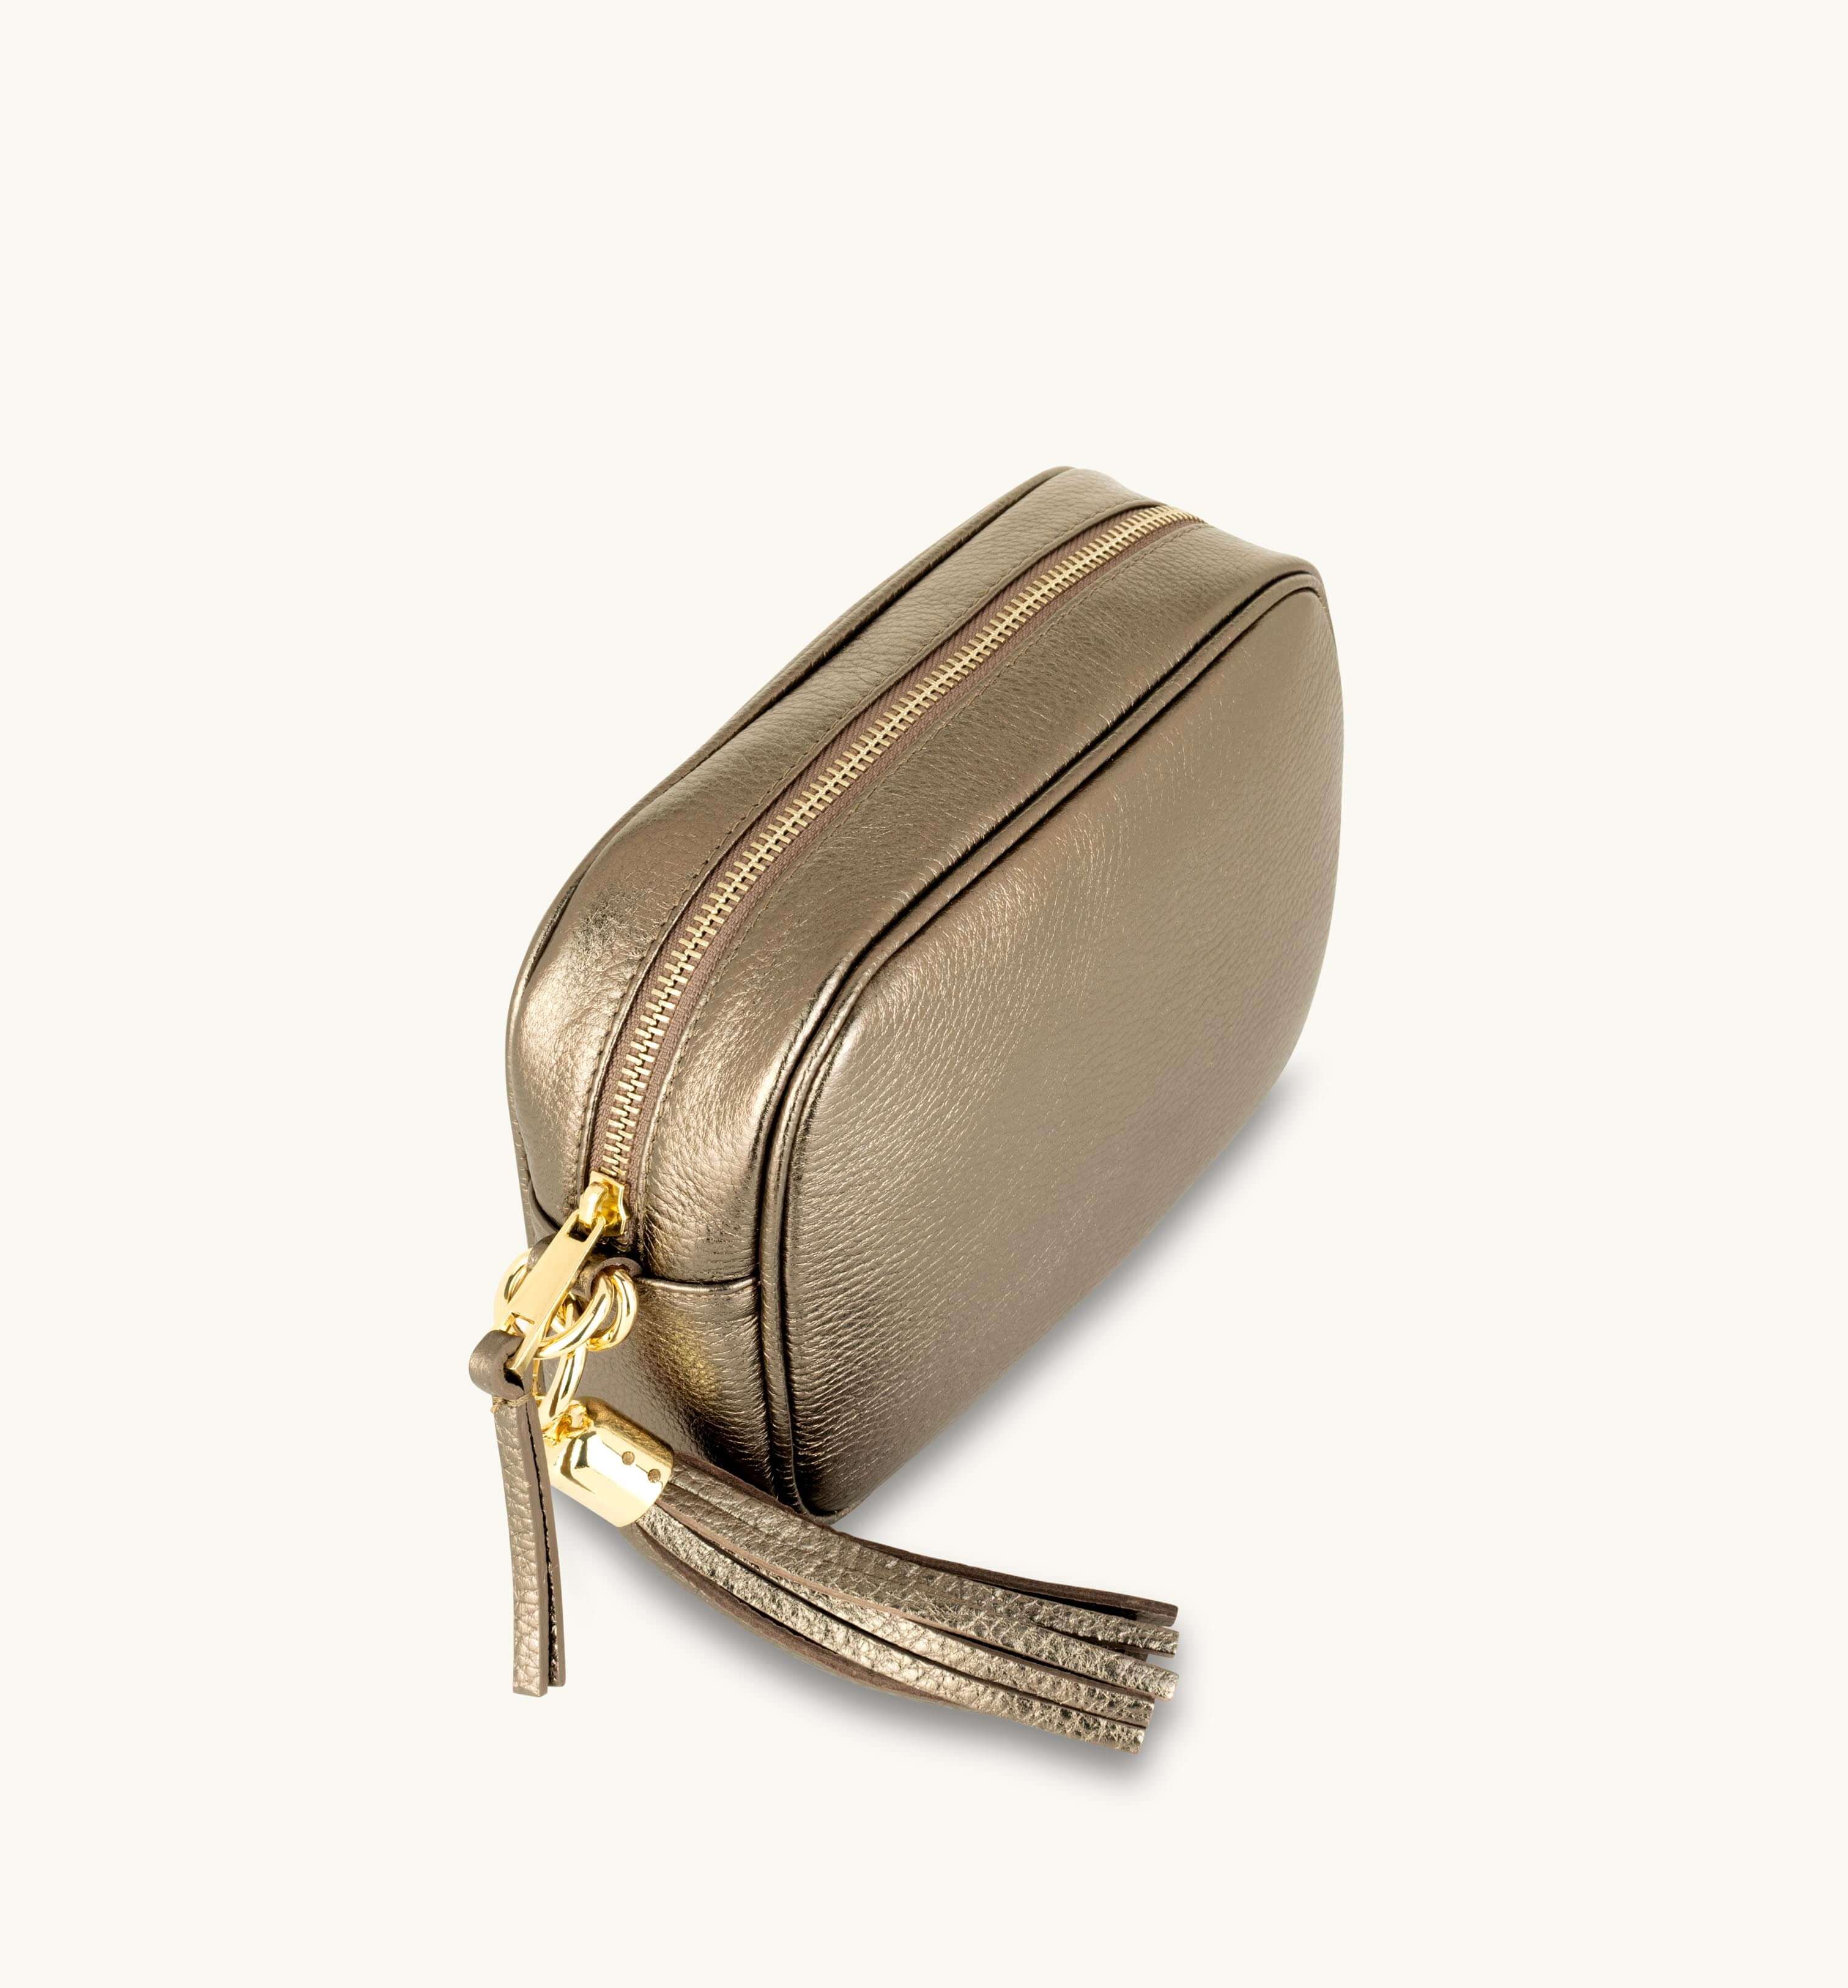 The Tassel Bronze Leather Crossbody Bag With Gold Chain Strap